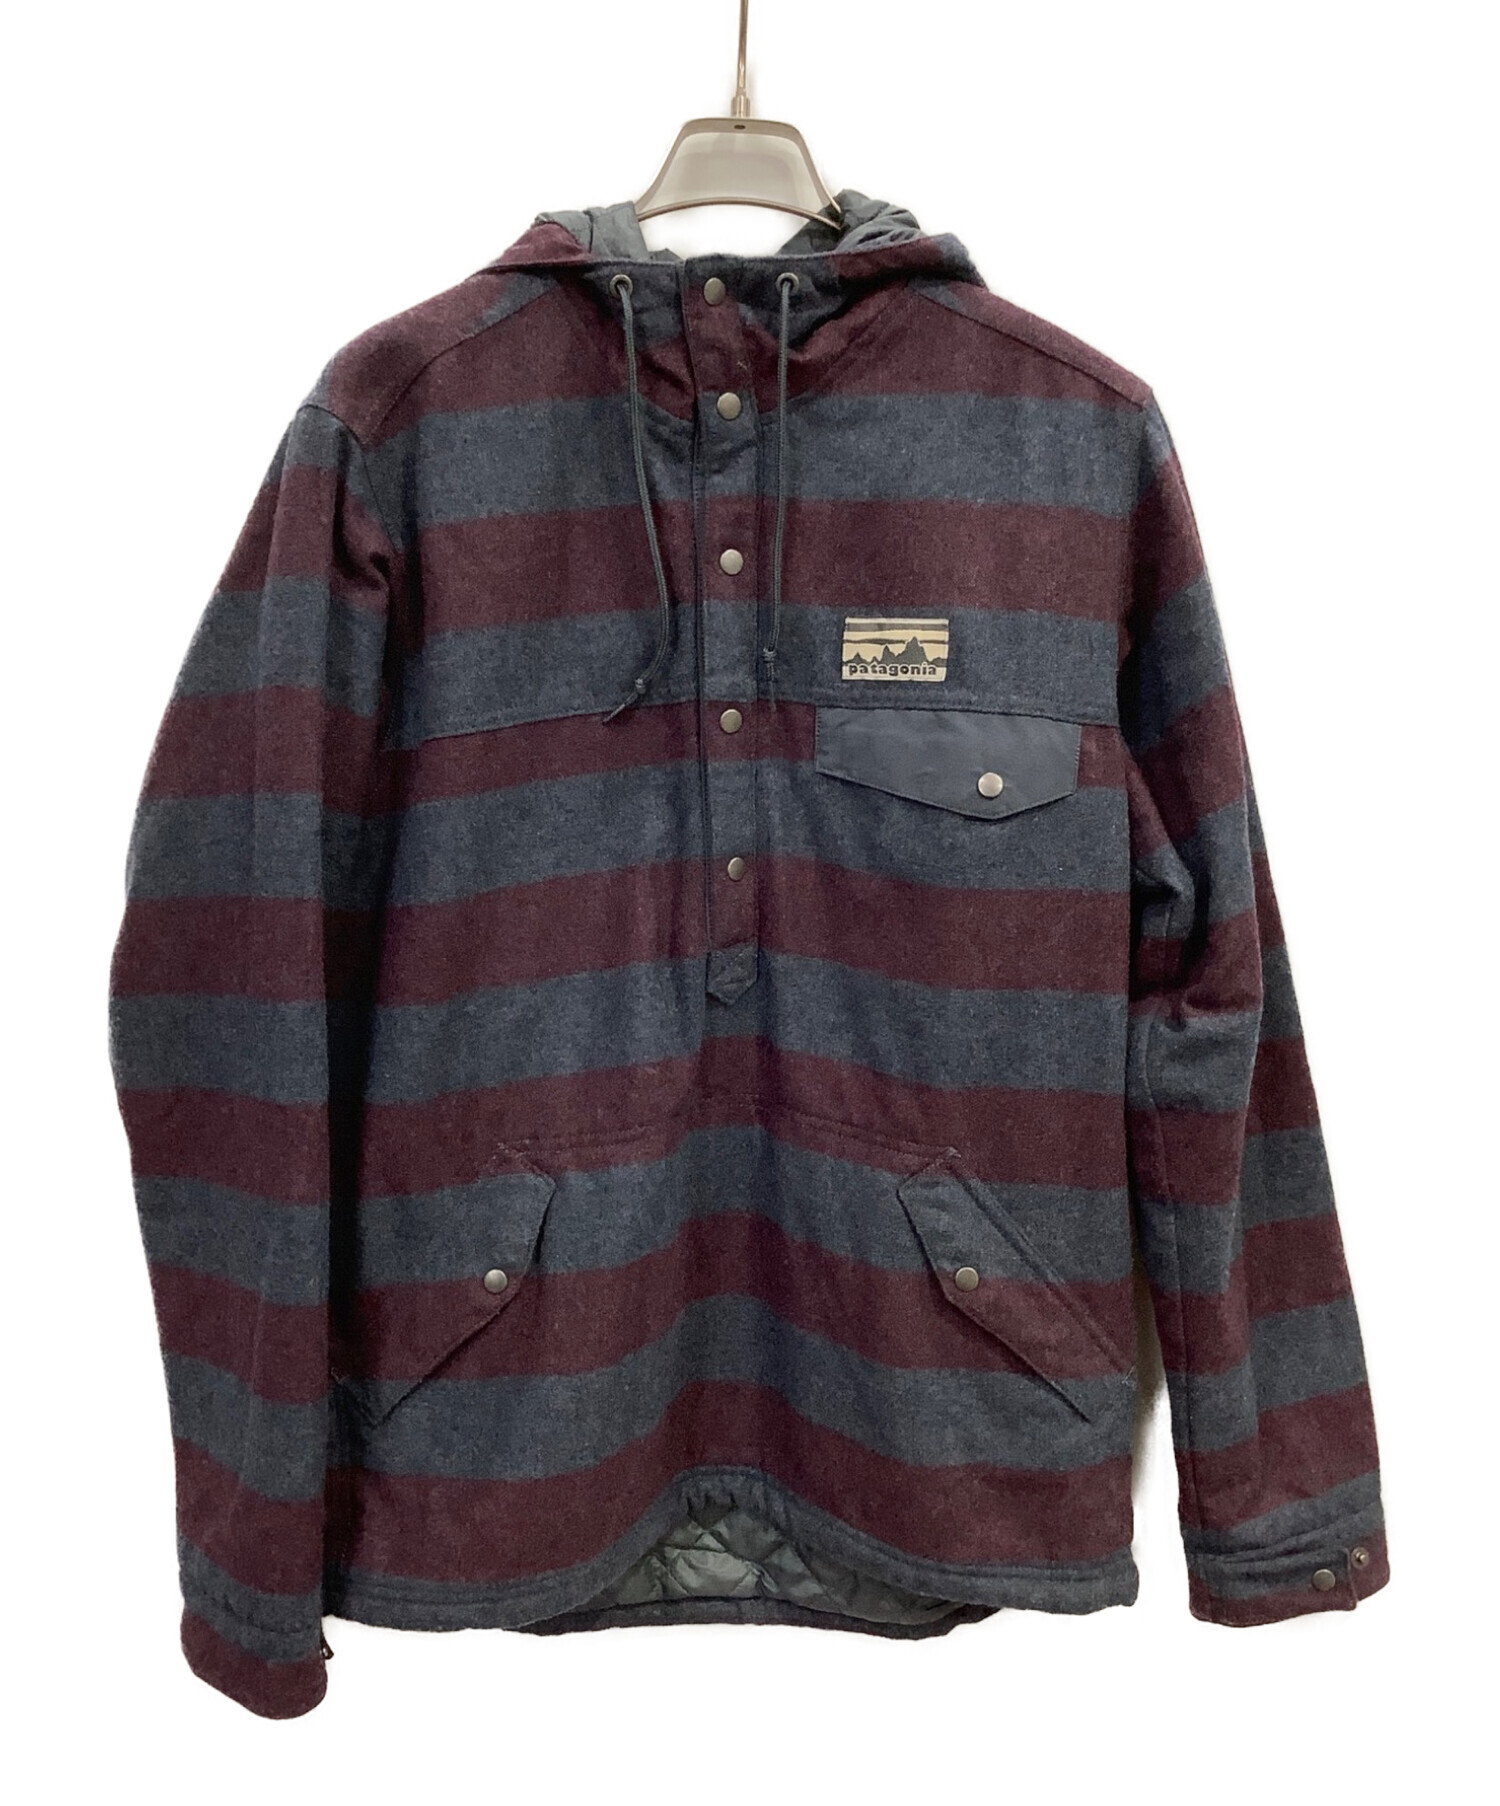 Patagonia Reclaimed Wool Snap-T Pulloverメンズ